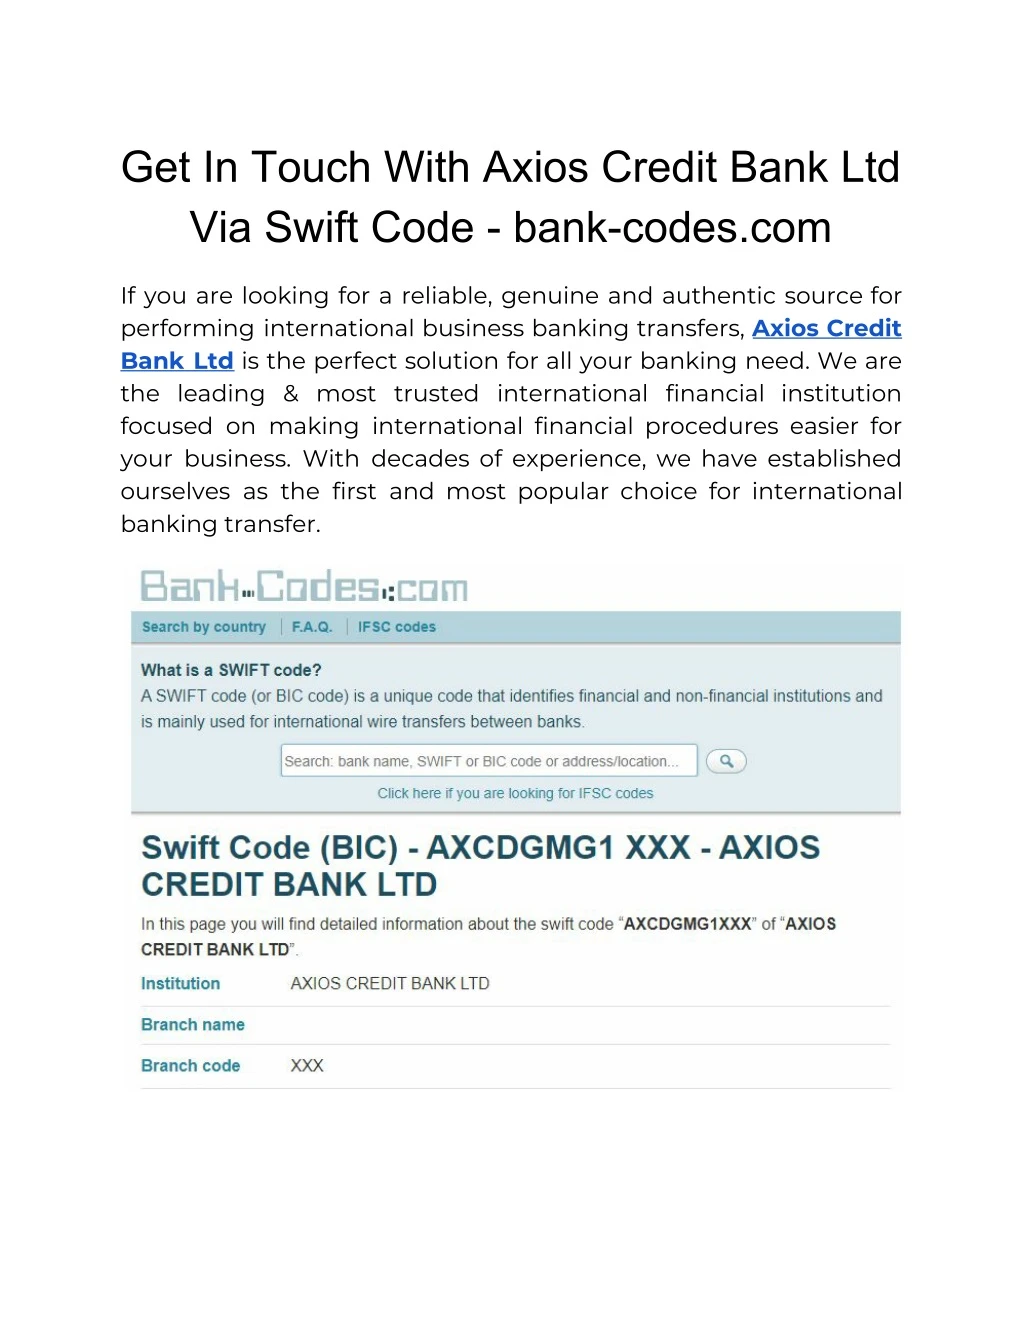 get in touch with axios credit bank ltd via swift